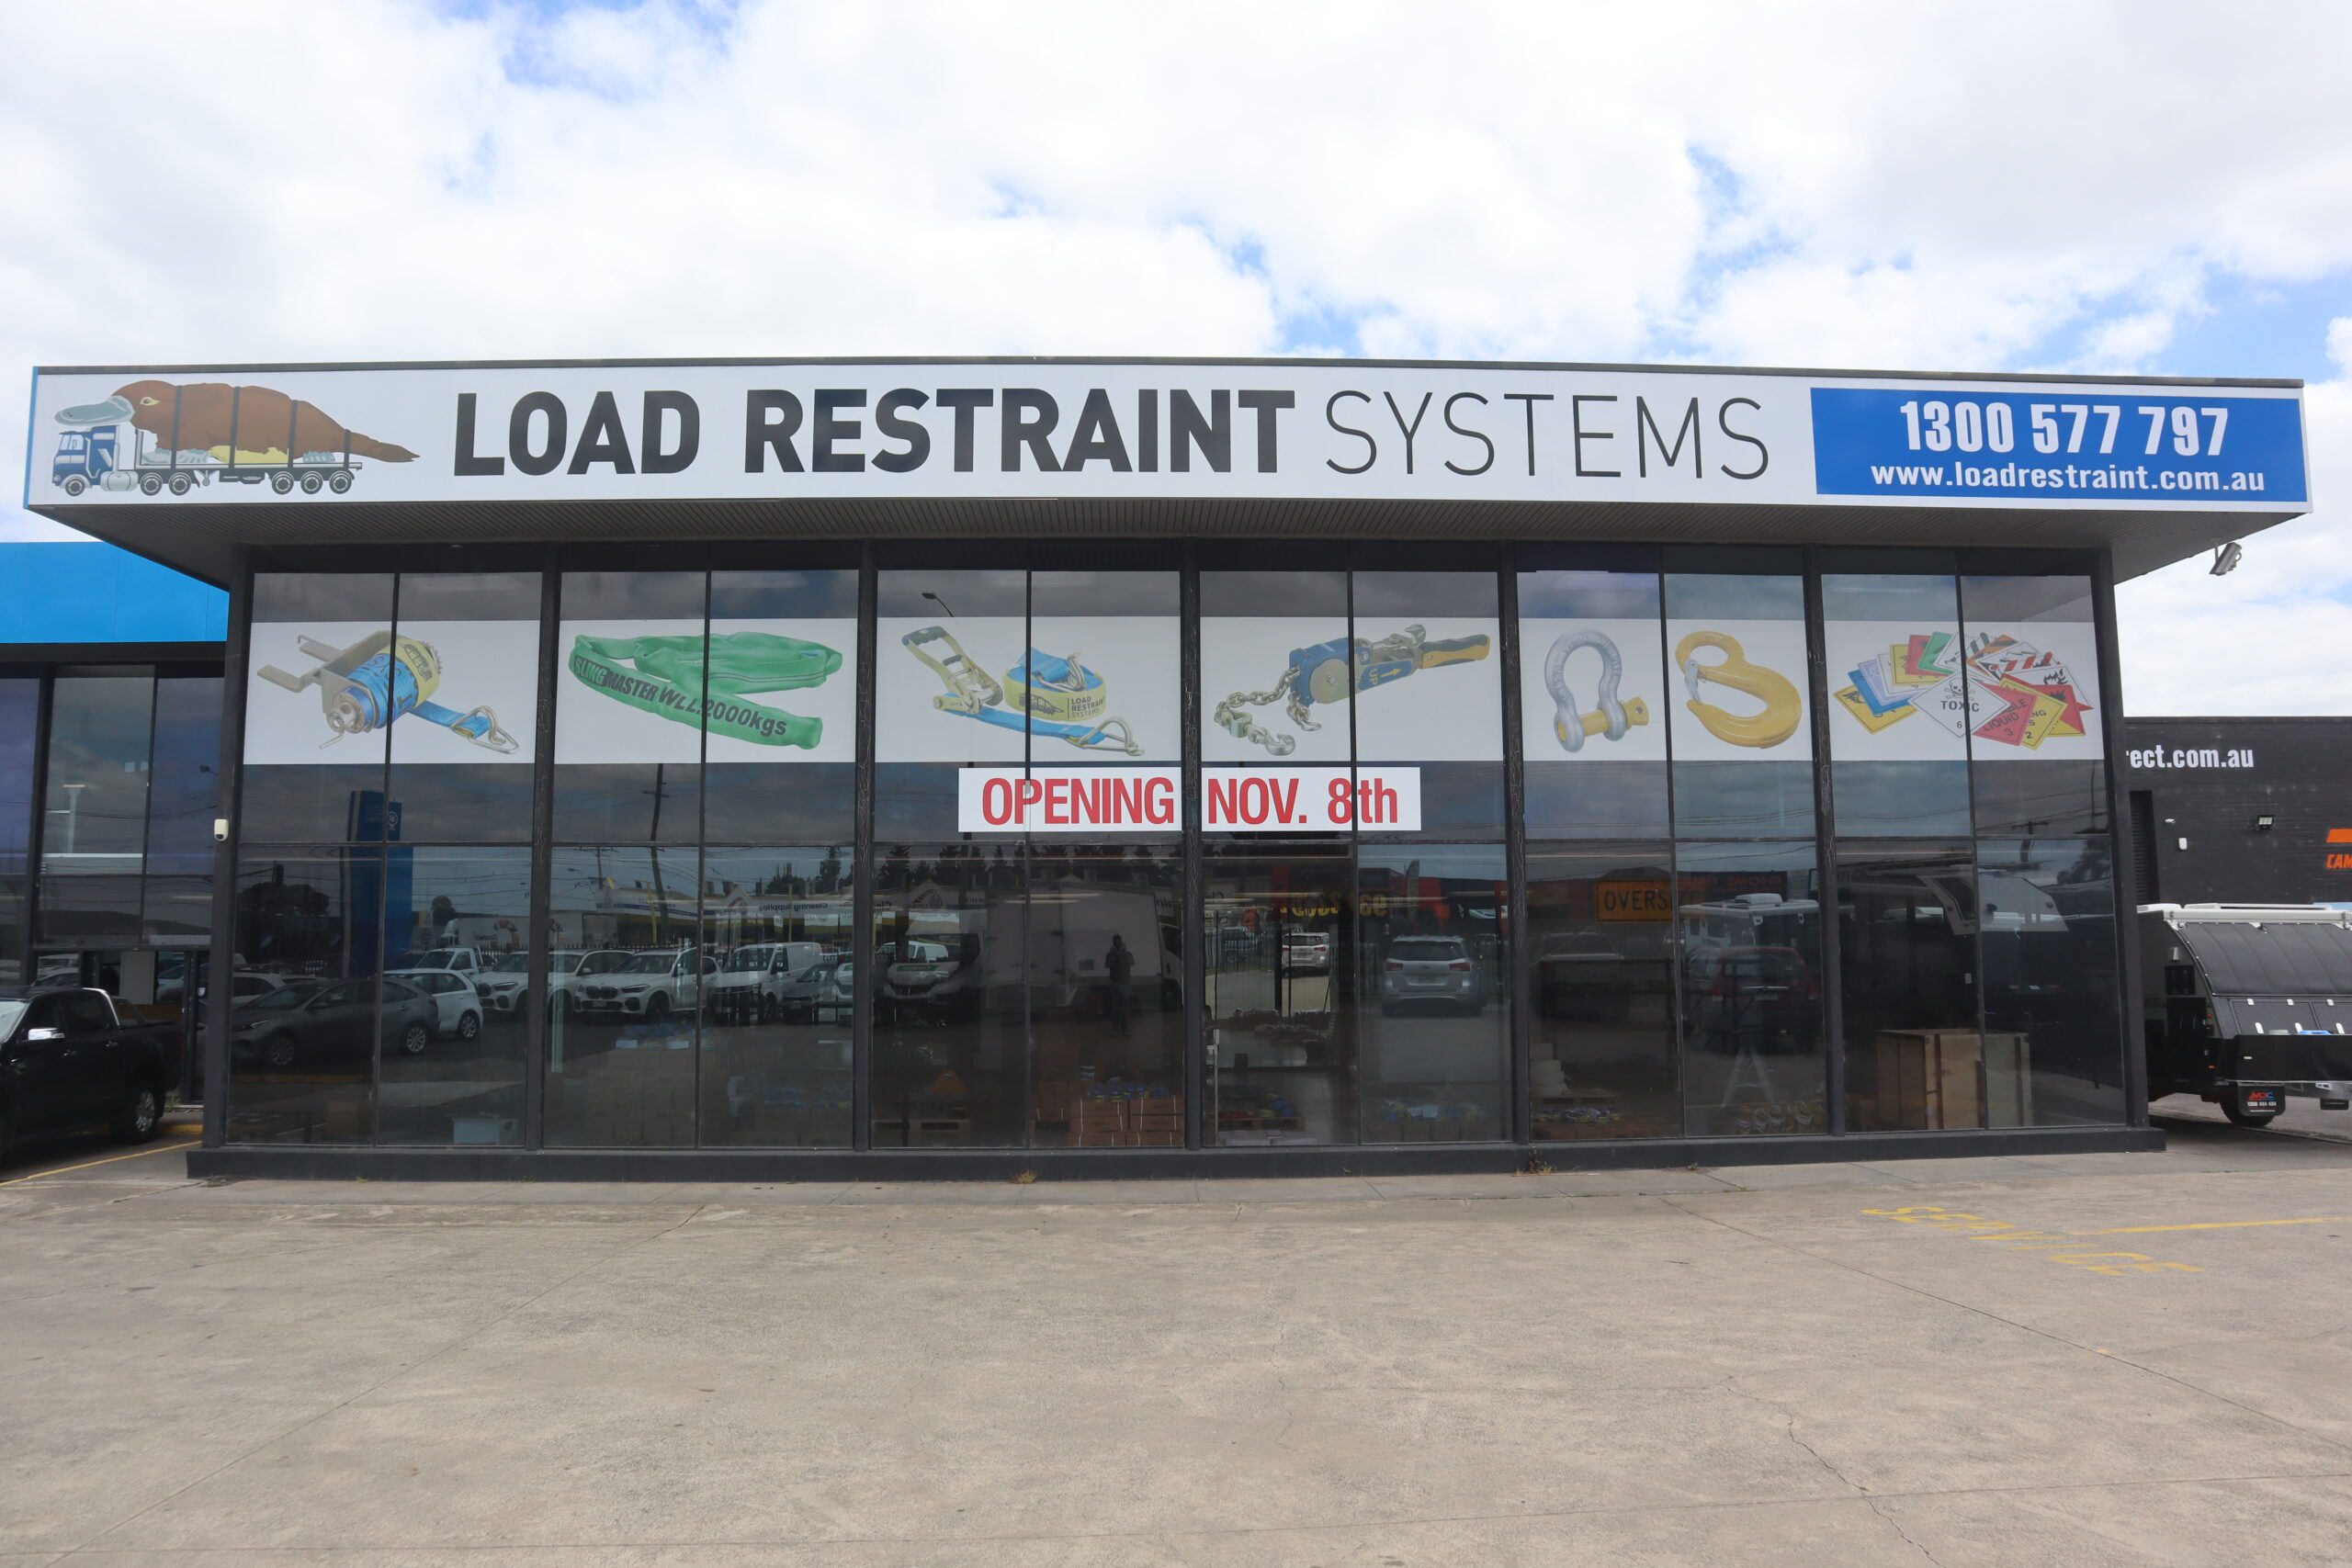 LOAD RESTRAINT SYSTEMS - CAMPBELLFIELD